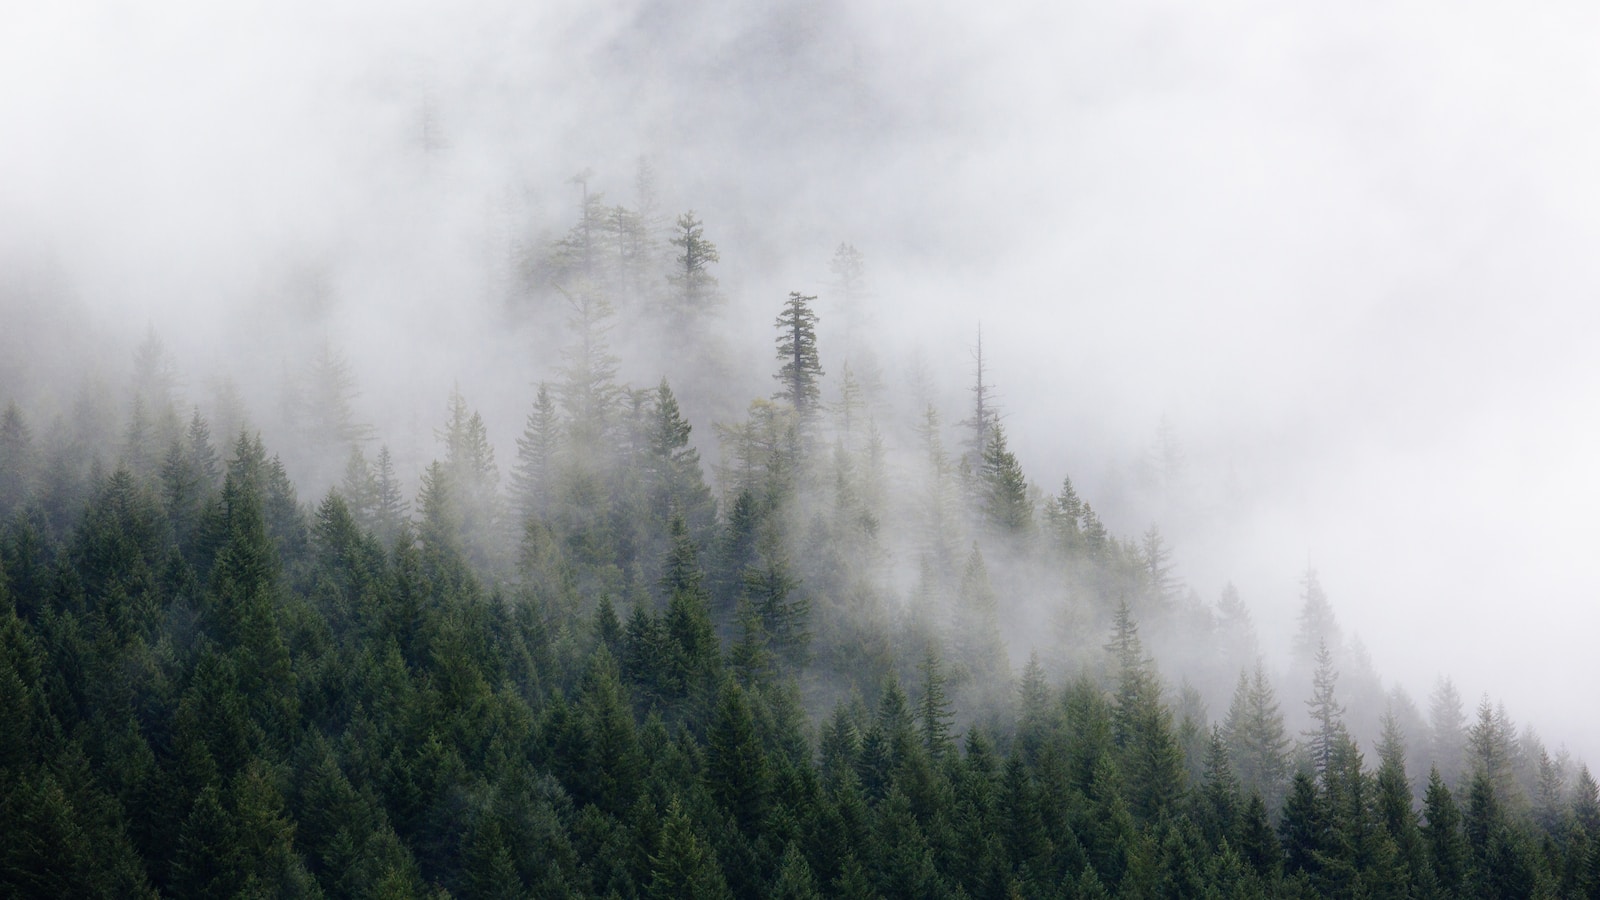 photography of green pine trees covered by fogs